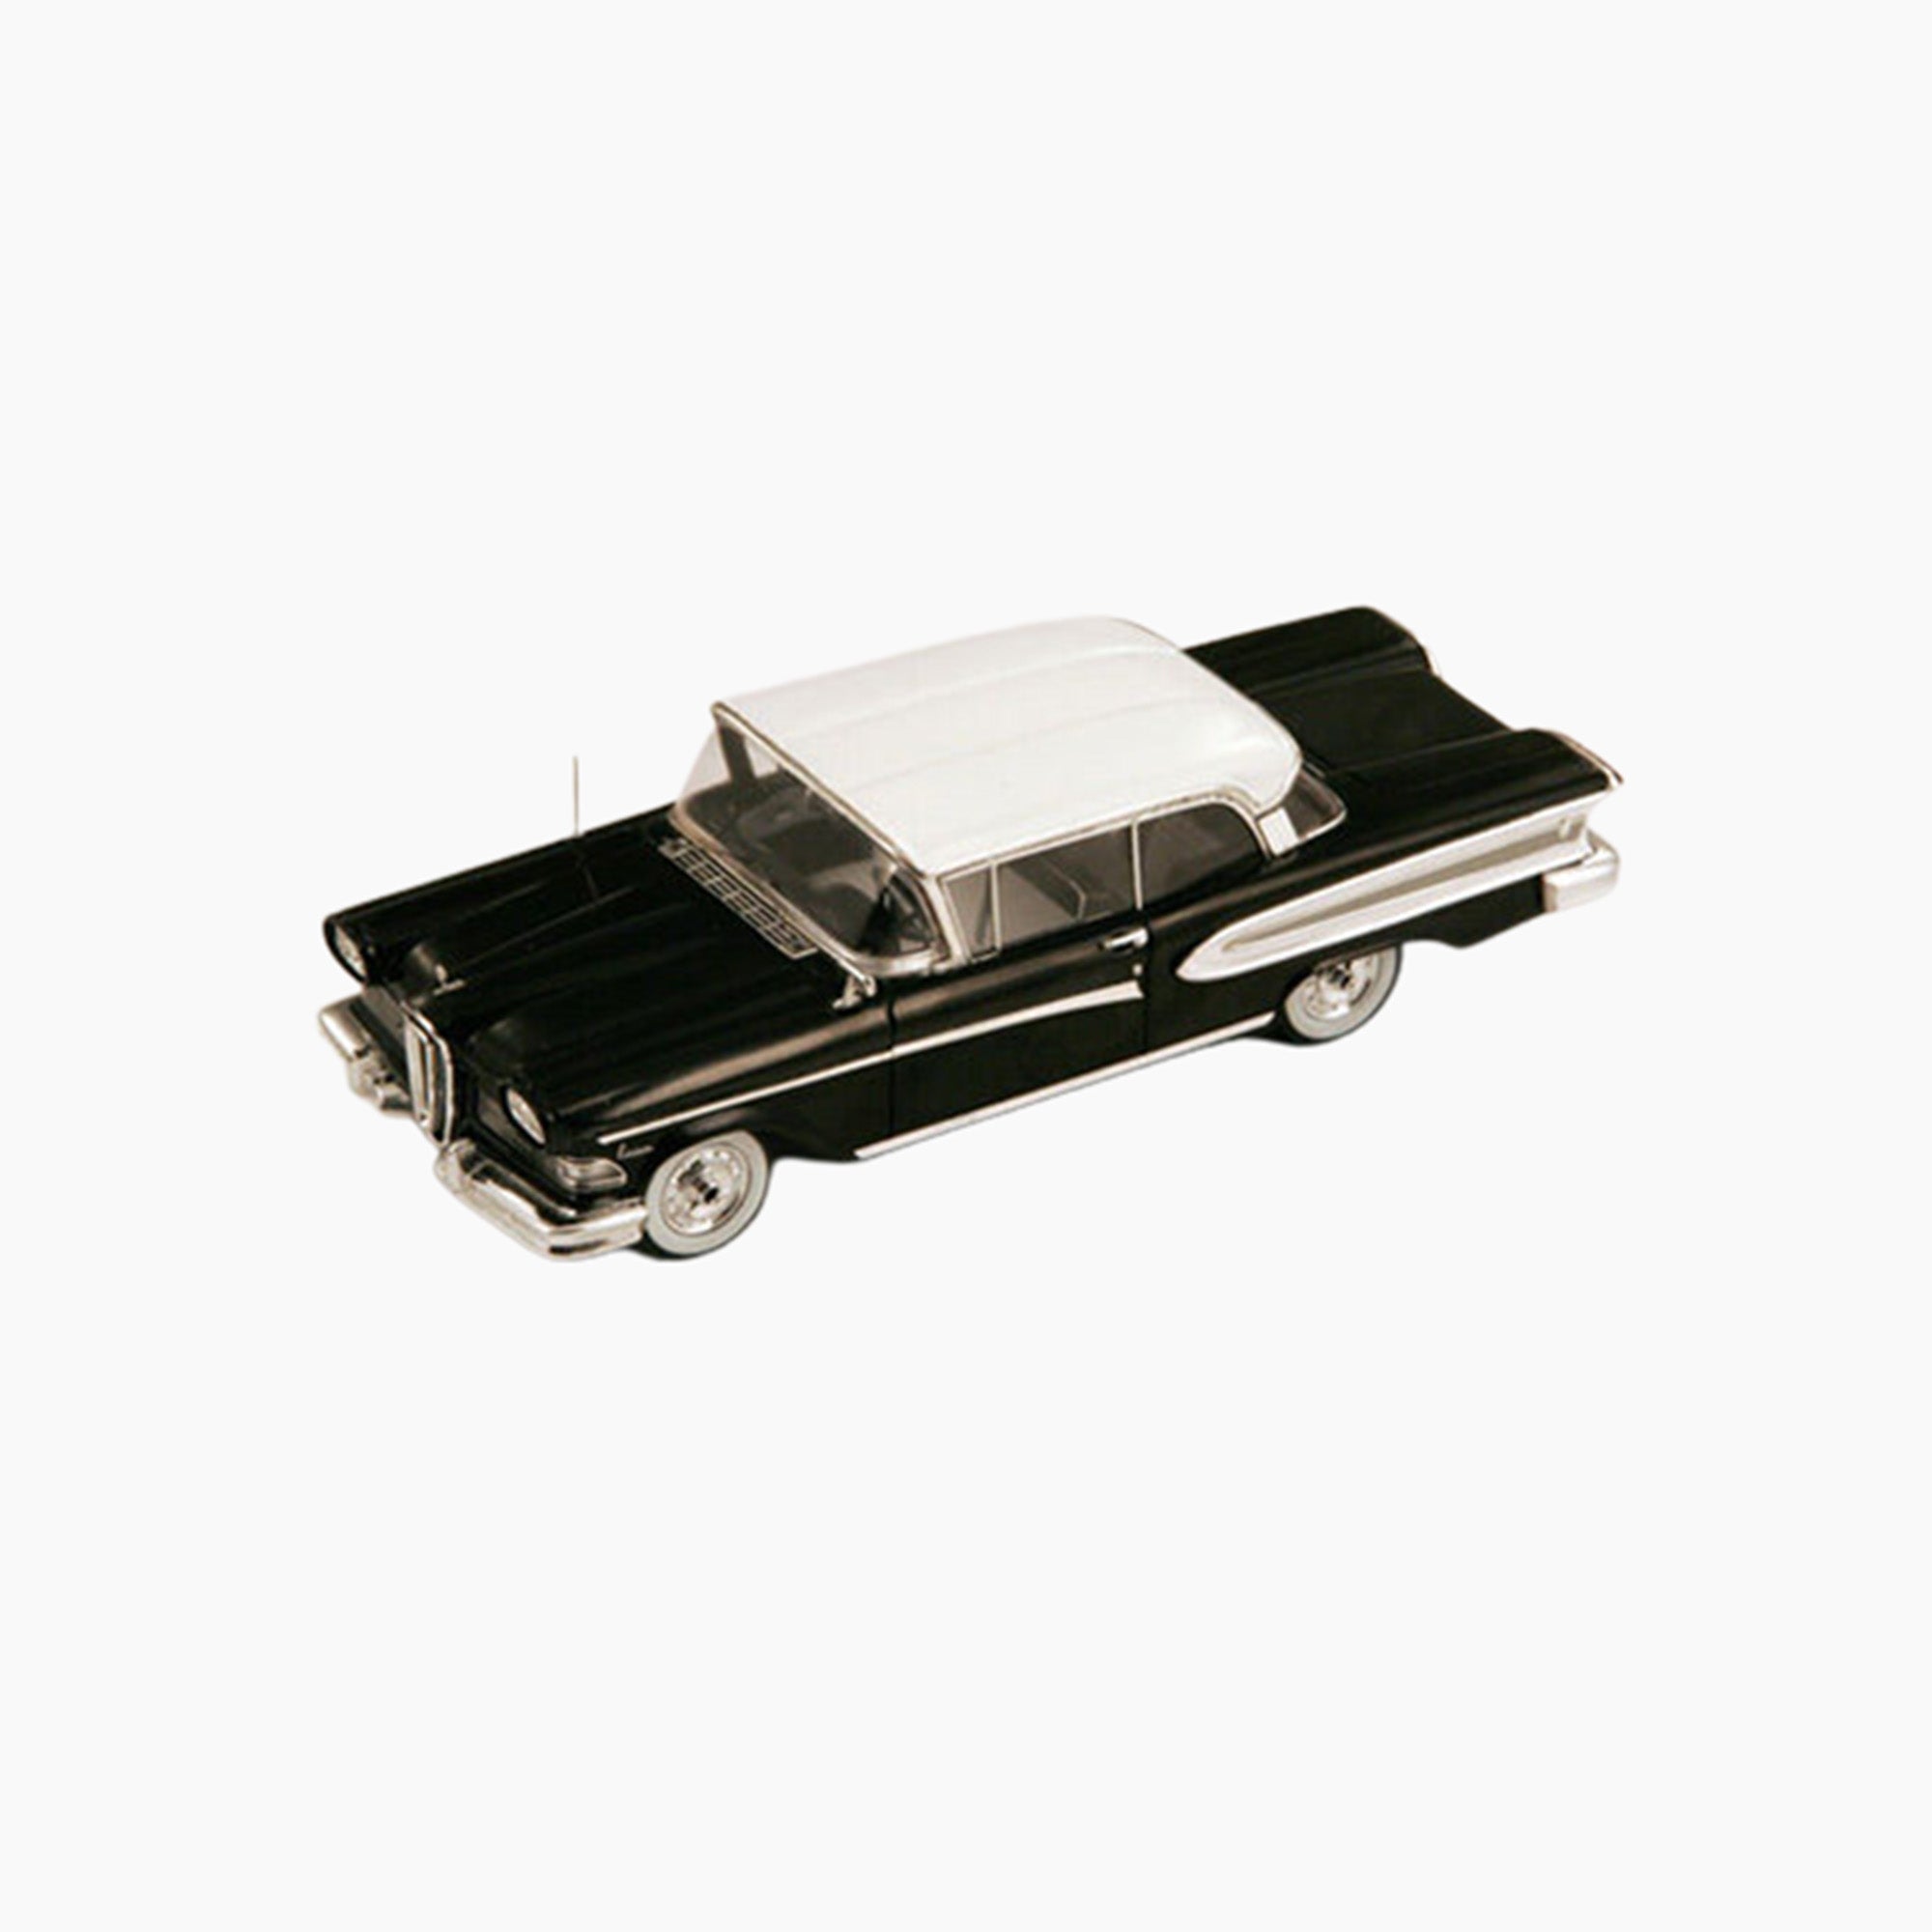 Edsel Citation Hard Top Coupe Two Doors 1958 | 1:43 Scale Model-1:43 Scale Model-Spark Models-gpx-store